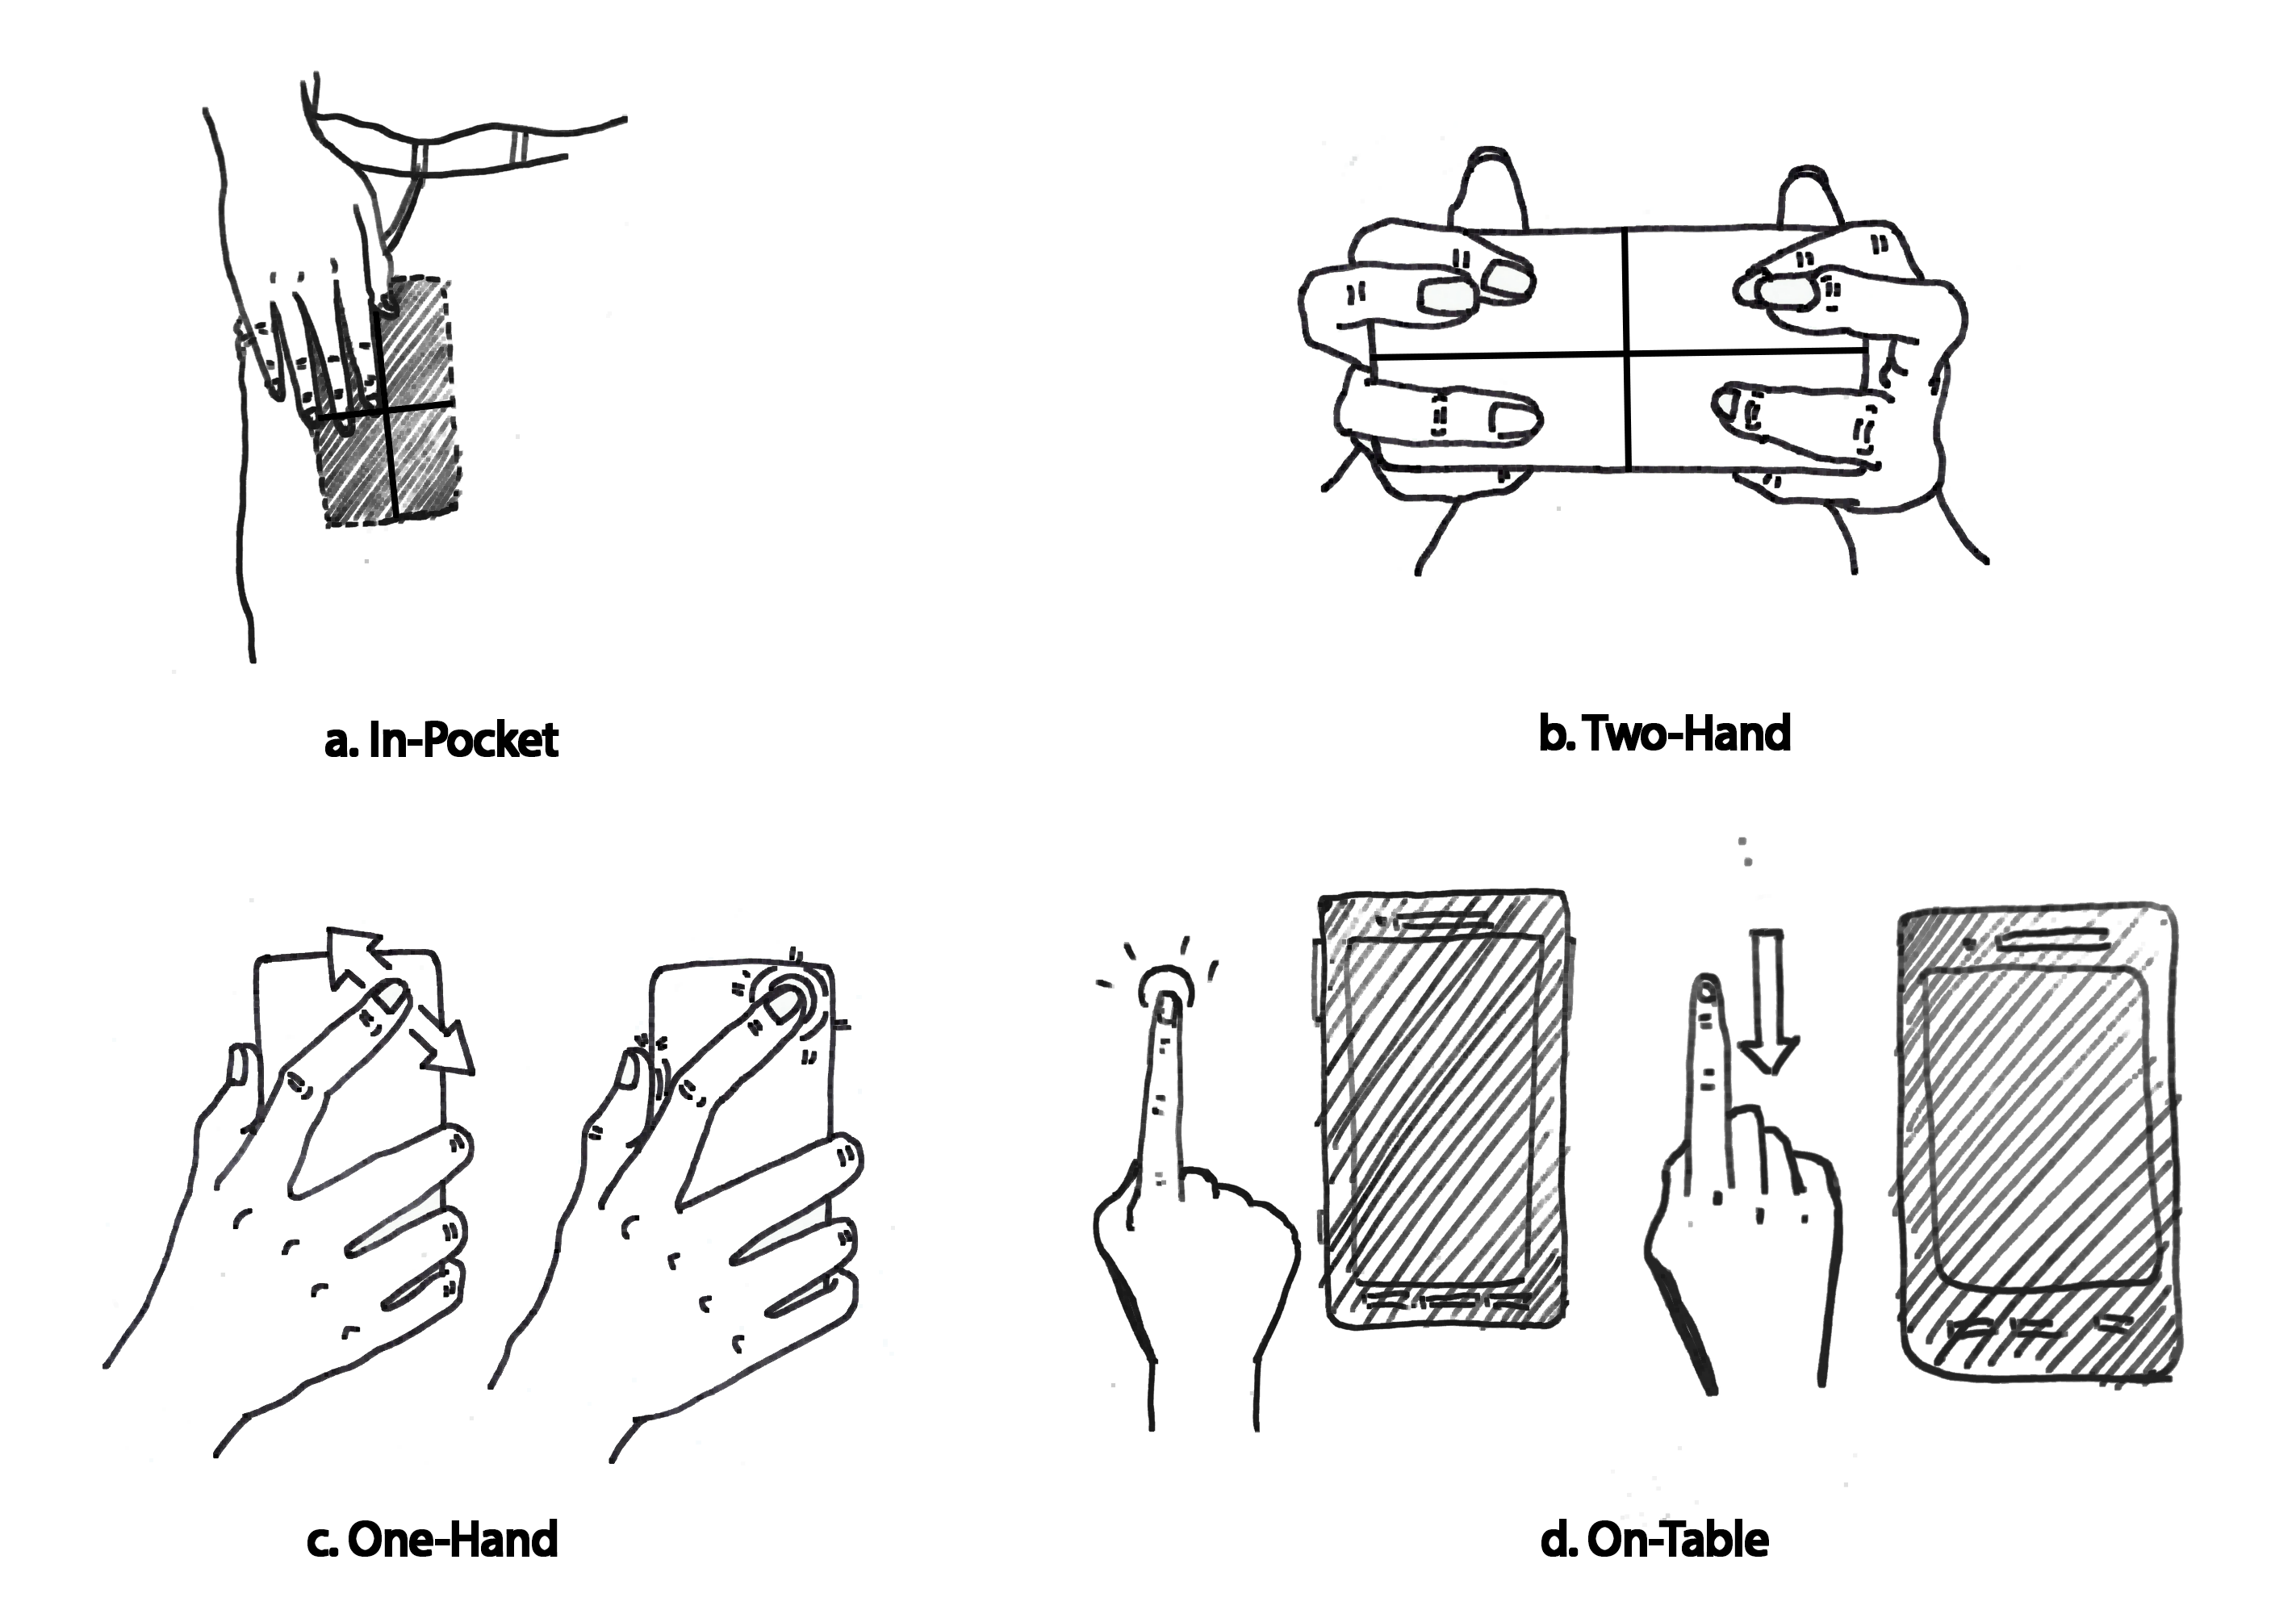 Four BeyondTouch interaction techniques, including tapping on a phone in the pocket, tapping on the back of a phone while holding it with two hands, tapping and sliding on the back of the phone while holding it with one hand, as well as tapping and sliding next to the phone on the table to control the device.